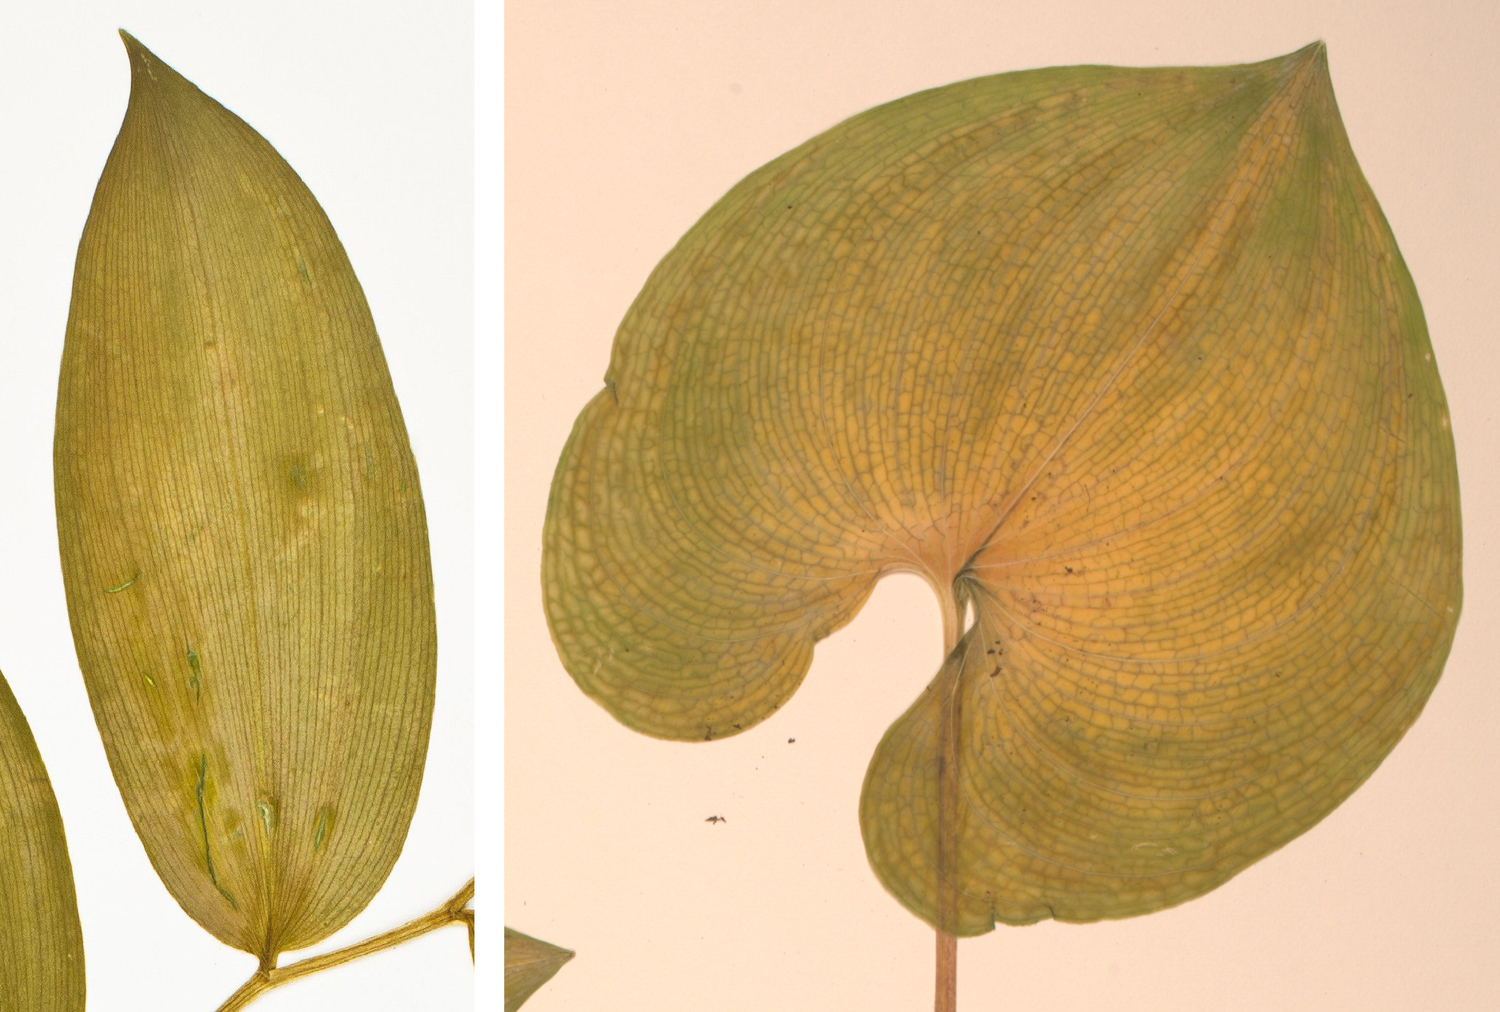 2-Panel figure showing photographs of leaves of Maianthemum from herbarium sheets. Panel 1: Leaf with parallelodromous venation. Panel 2. Leaf with campylodromous venation.